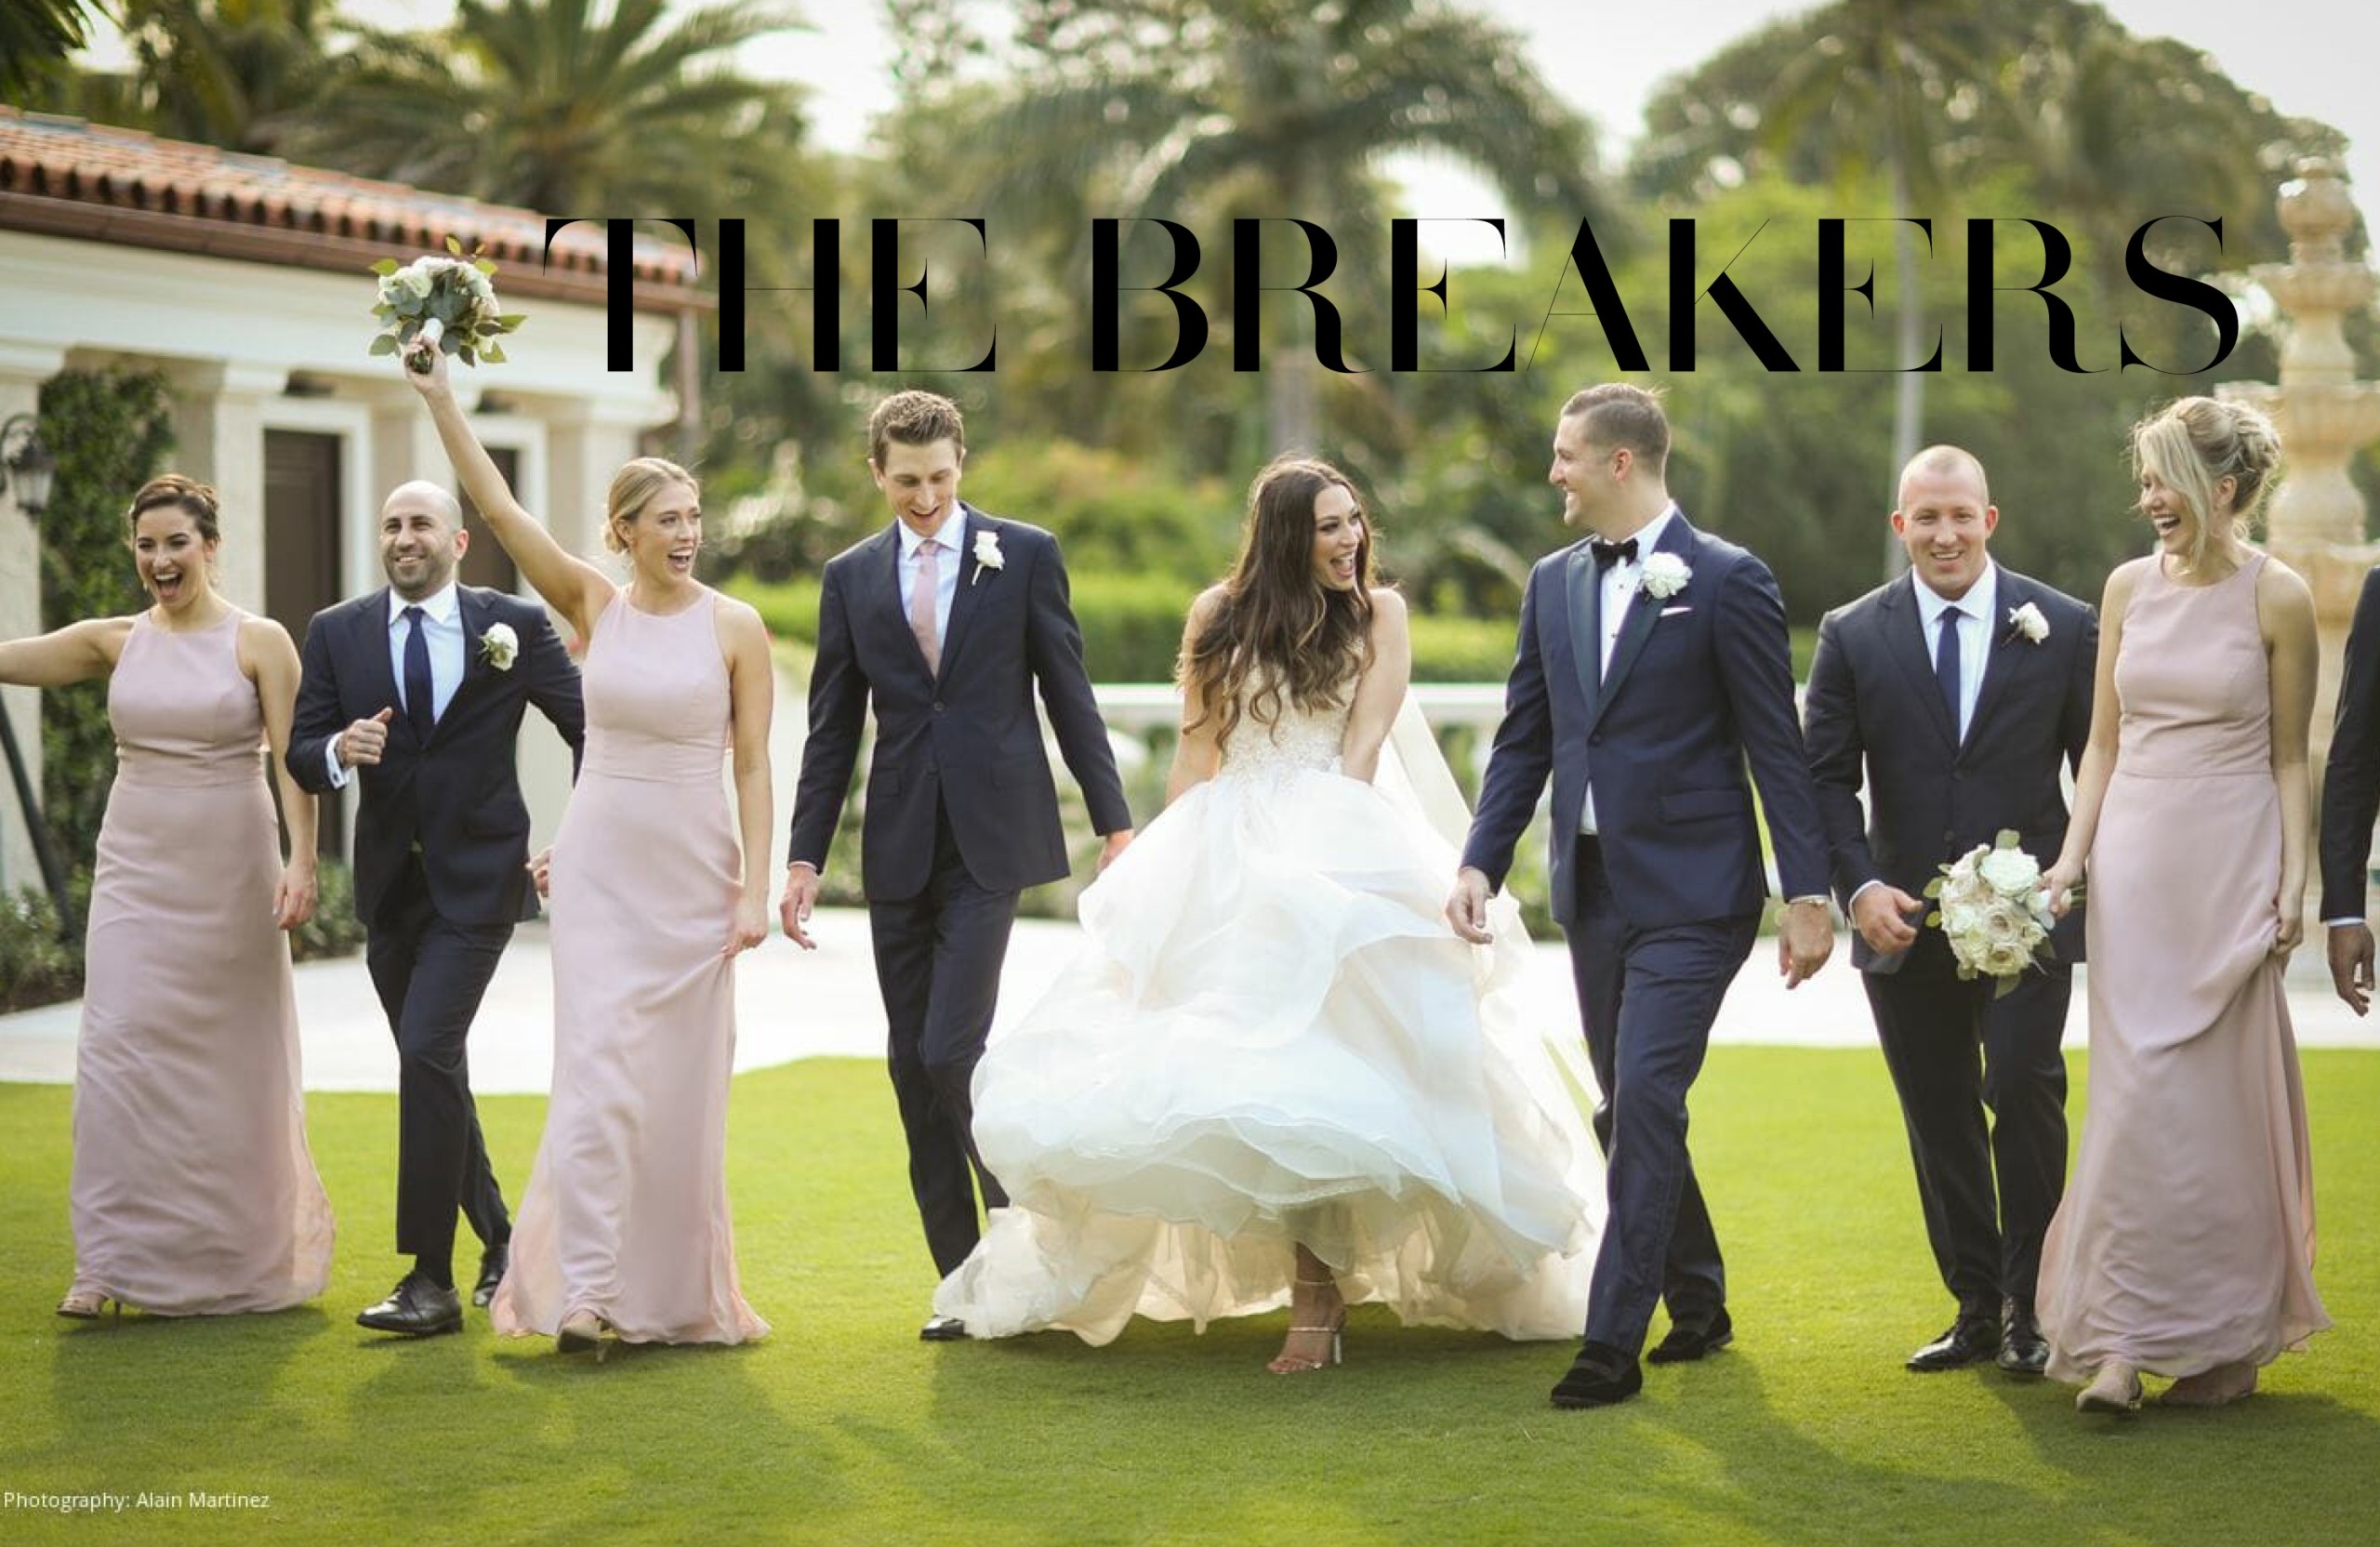 GILDED AGE GLAMOUR – LUXURY WEDDINGS AT THE BREAKERS PALM BEACH ...